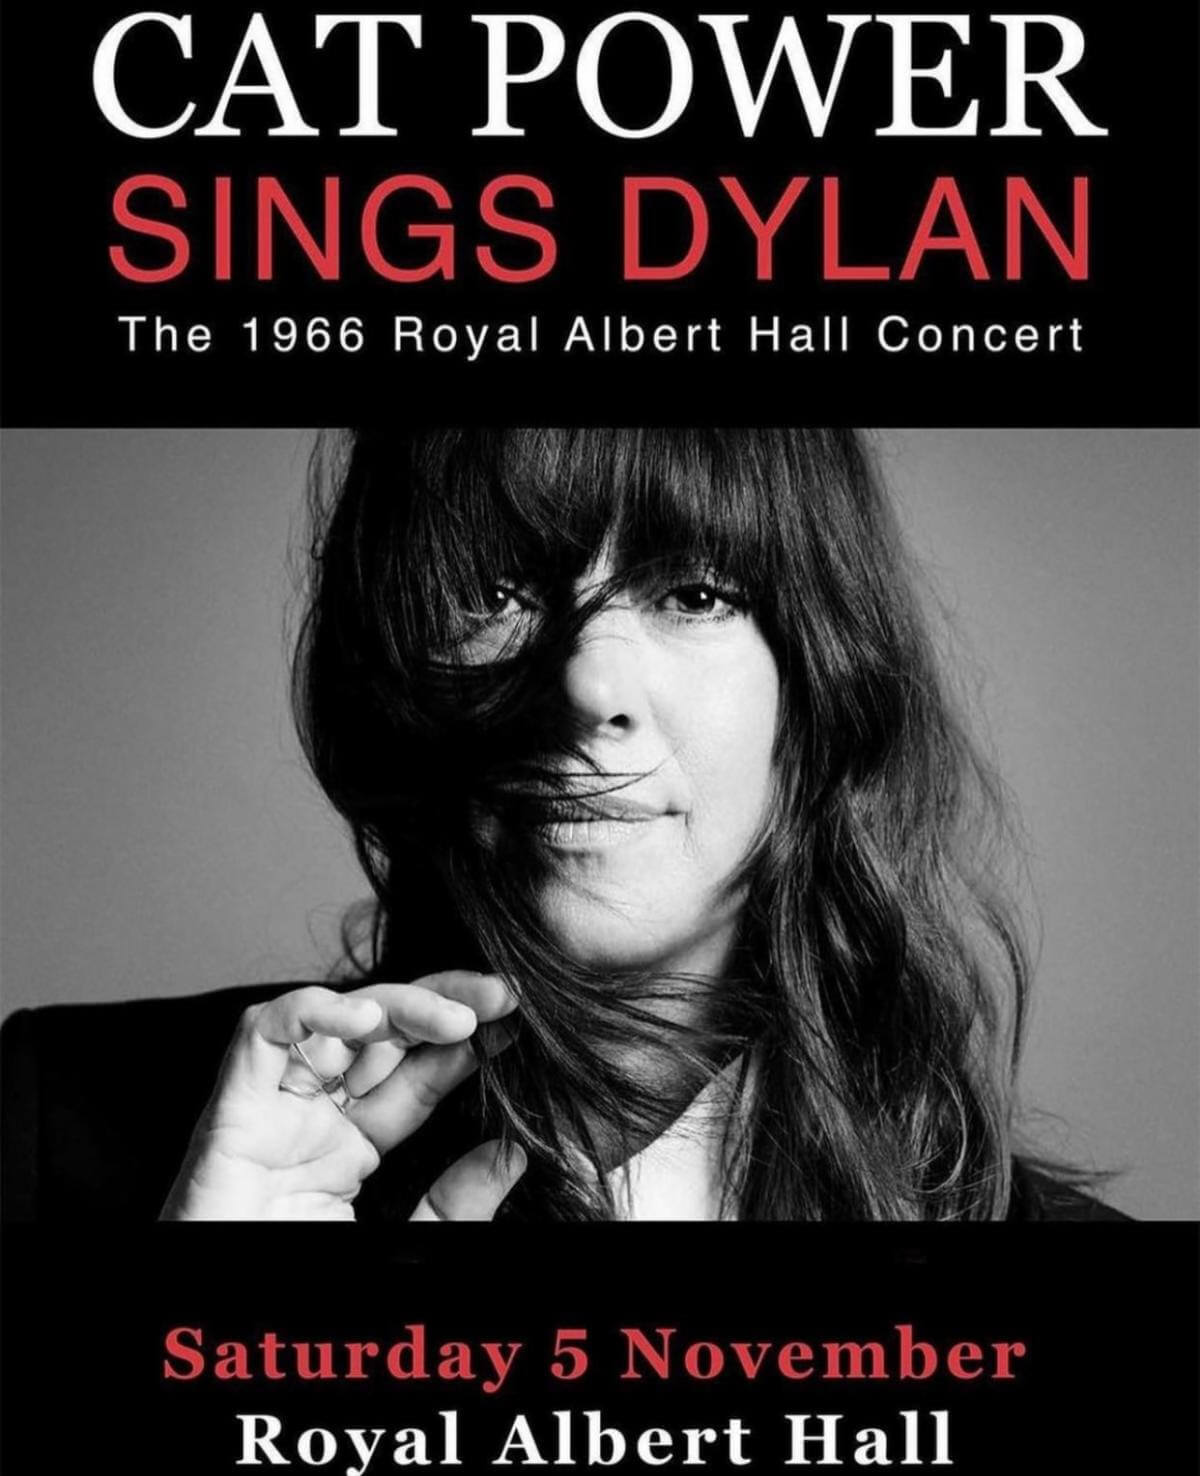 Cat Power Announces Dylan Royal Albert Hall Show, On November 5th Marshall will plays a set recreating Bob Dylan’s legendary 1966 show